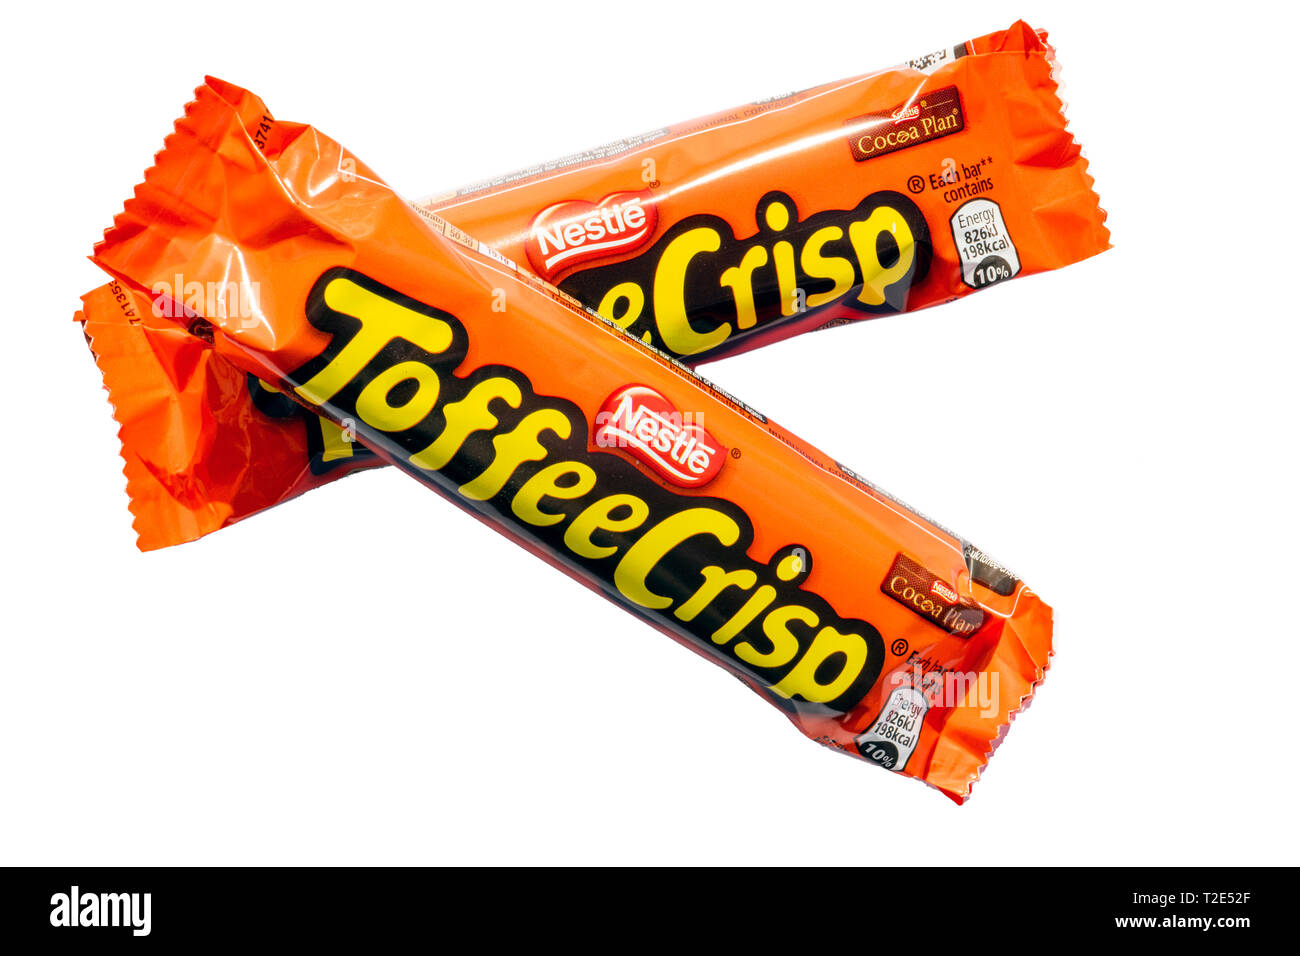 Nestle Toffee Crisp chocolate bar, cut out or isolated on a white background. Stock Photo